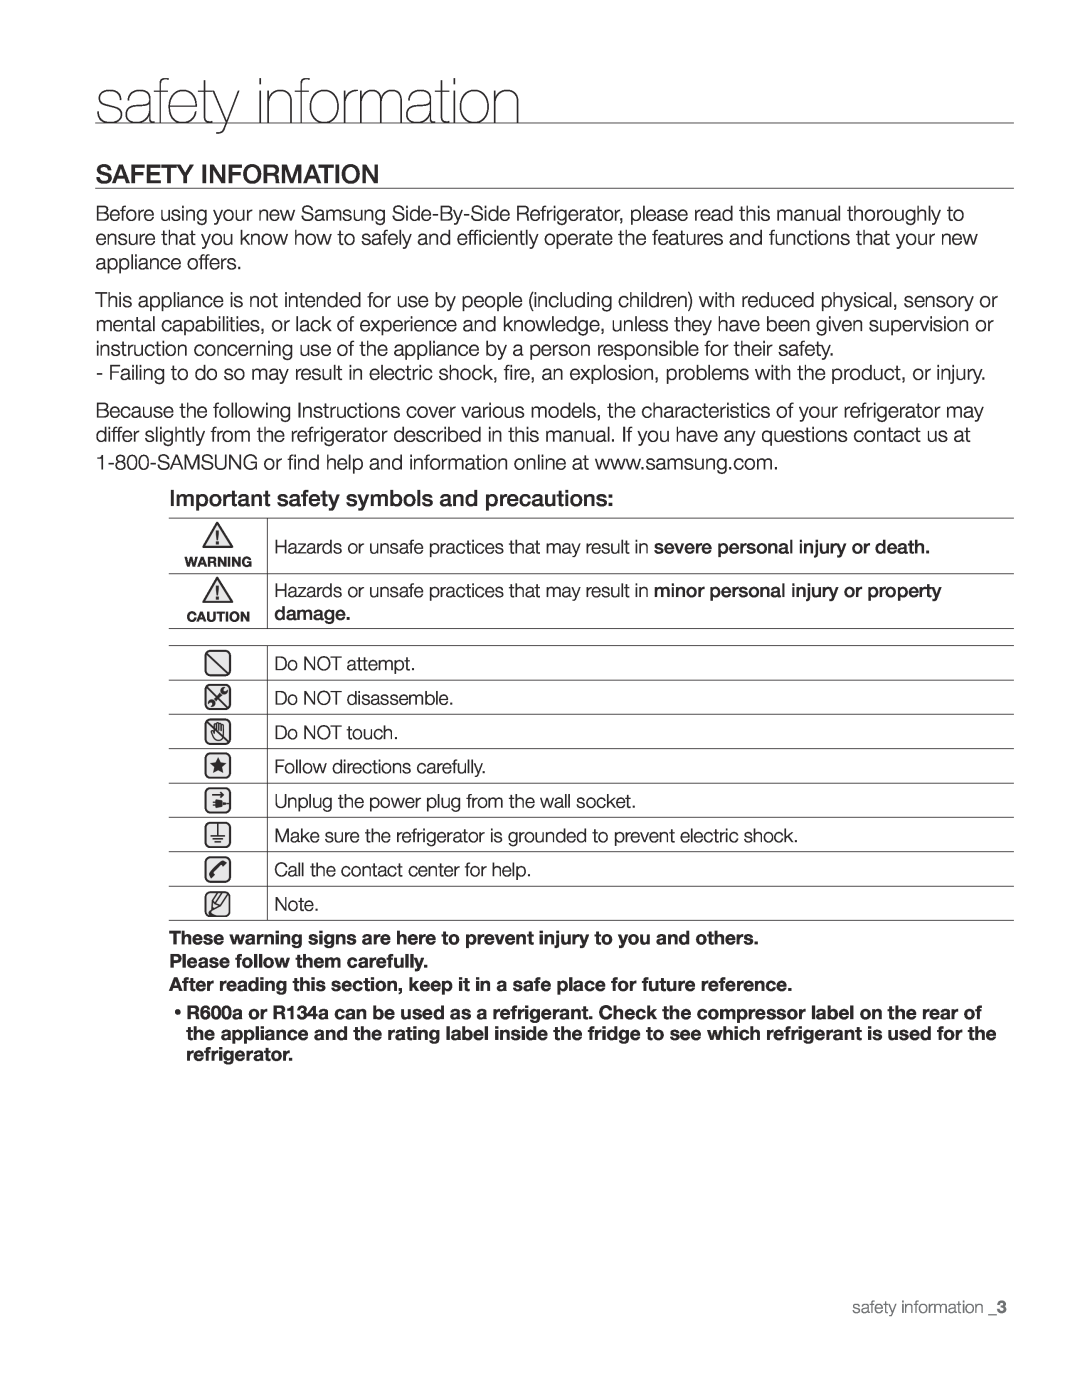 Samsung RS263TDBP, RS263TDRS, RS263TDPN safety information, Safety Information, Important safety symbols and precautions 